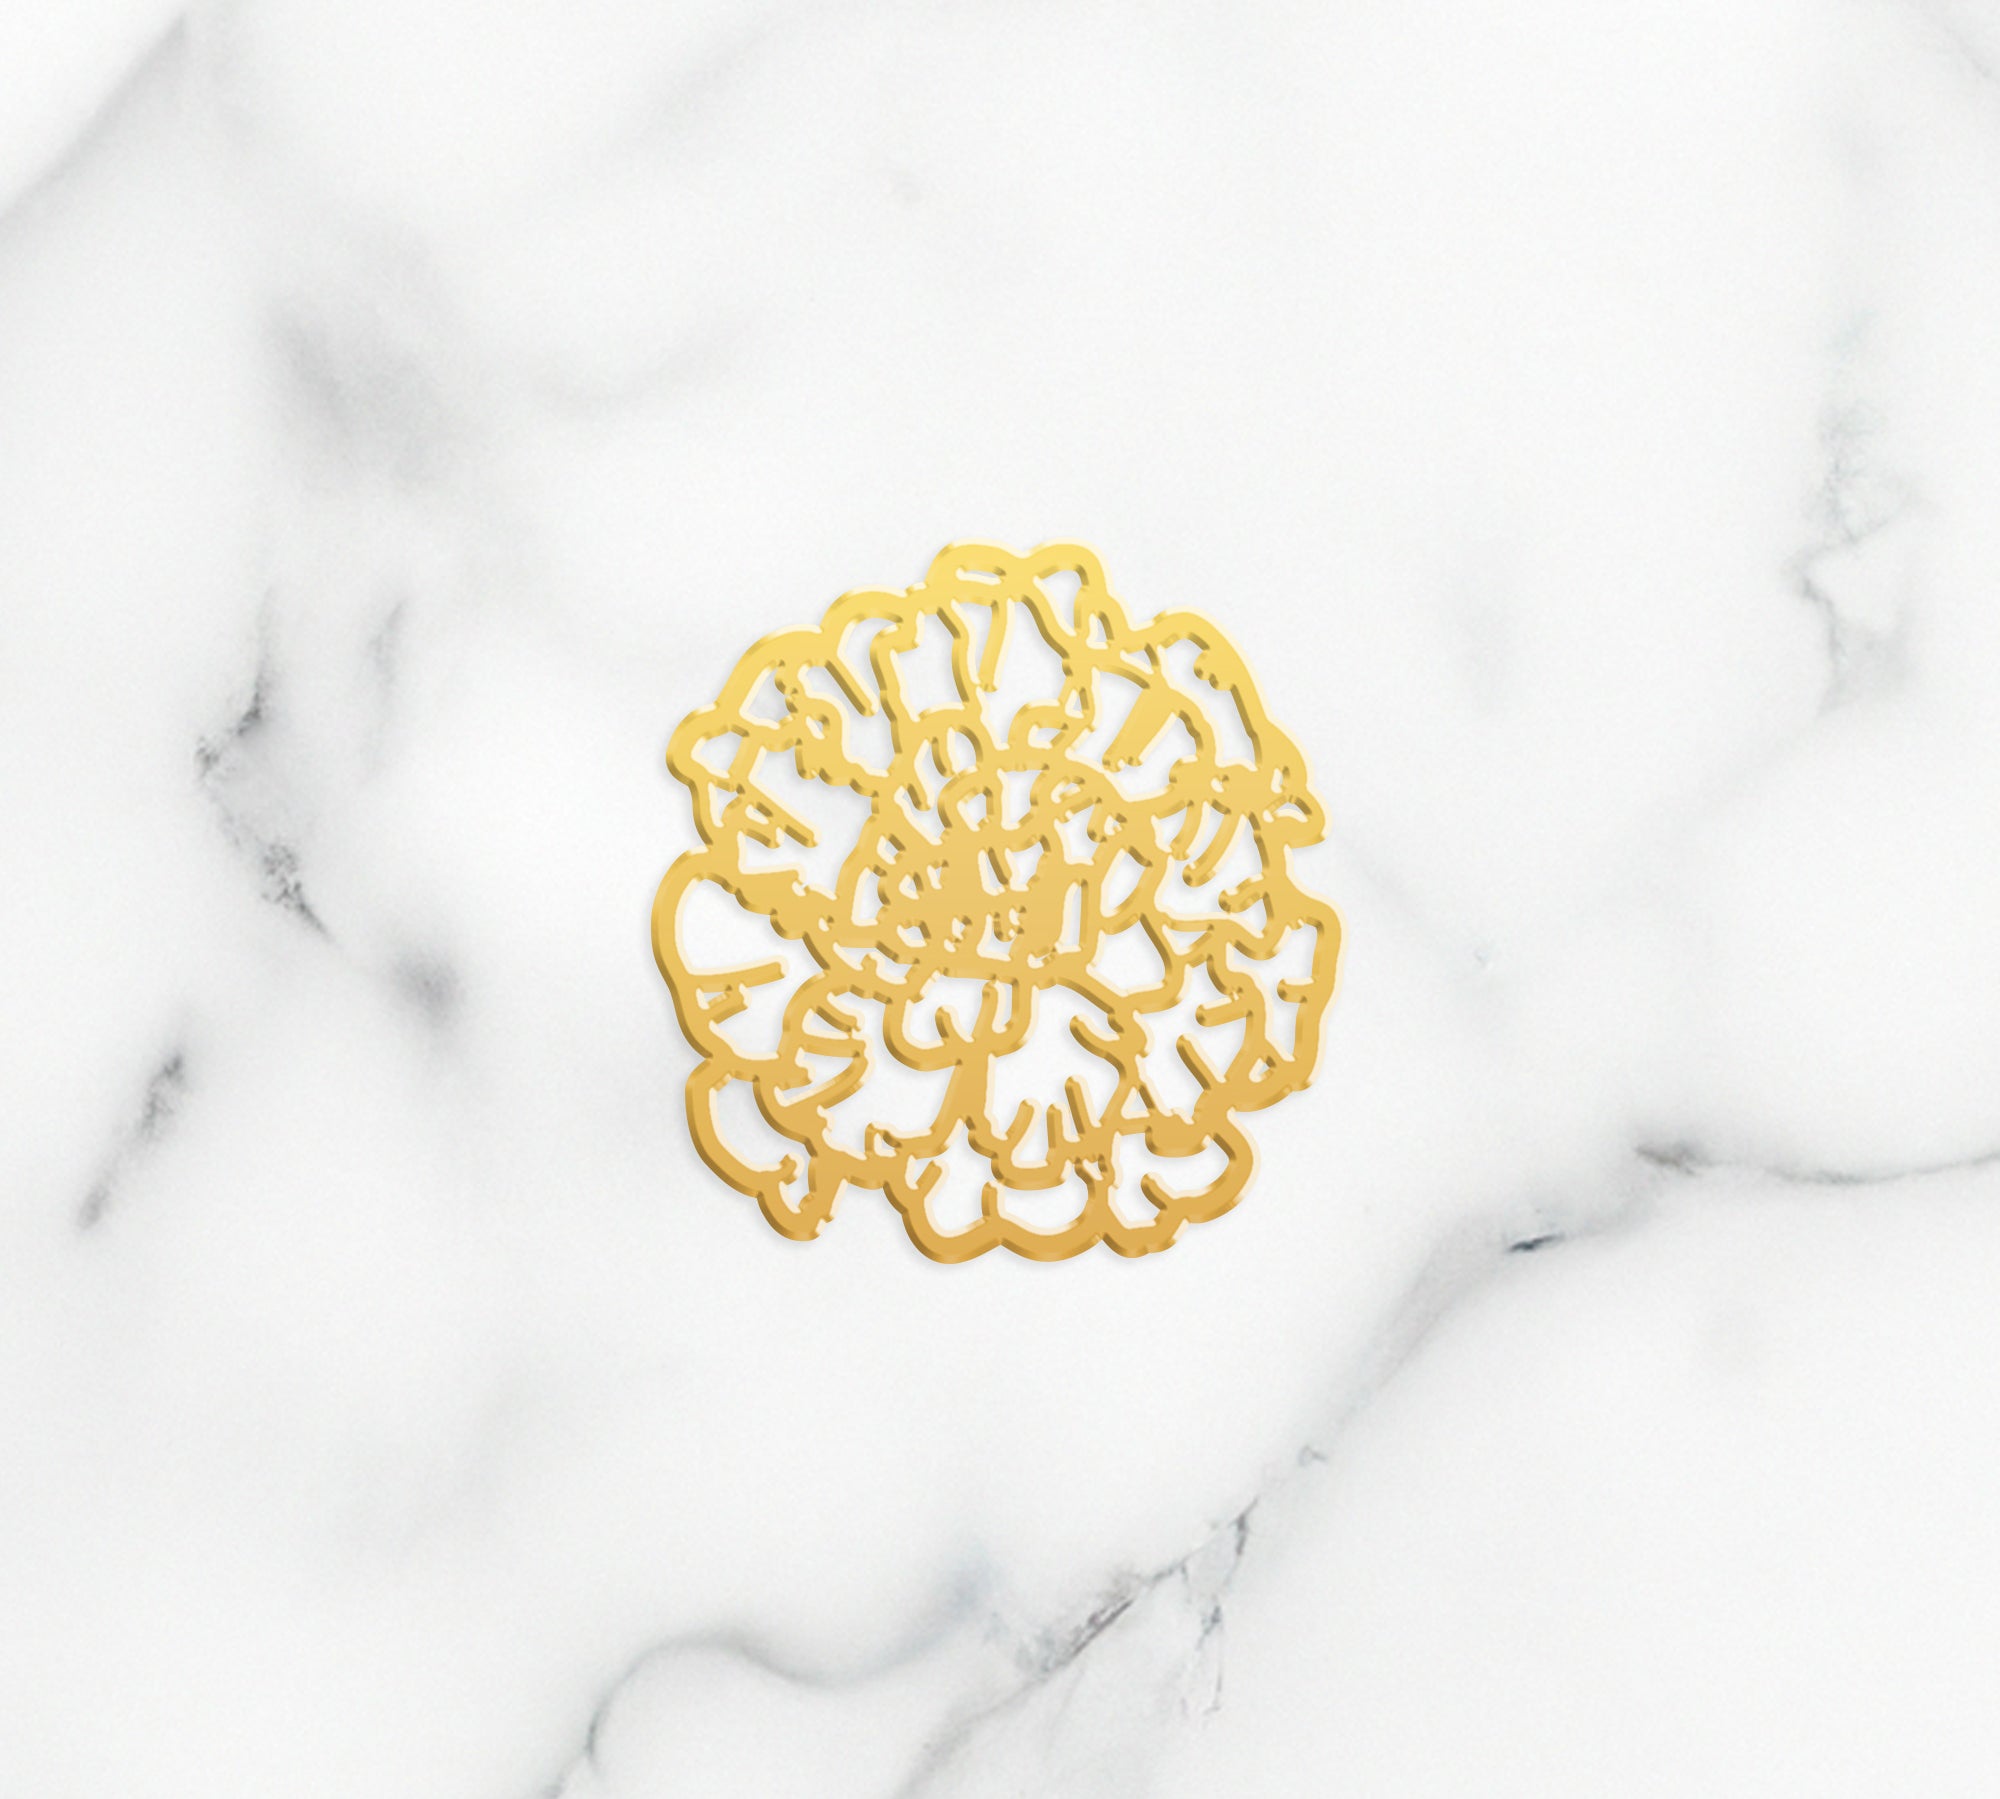 Marigold Charm - High Quality, Affordable, Whimsical, Hand Drawn Individual Charms for a Custom Locket - October Birthday Gift - Available in Gold and Silver - Made in USA - Brevity Jewelry